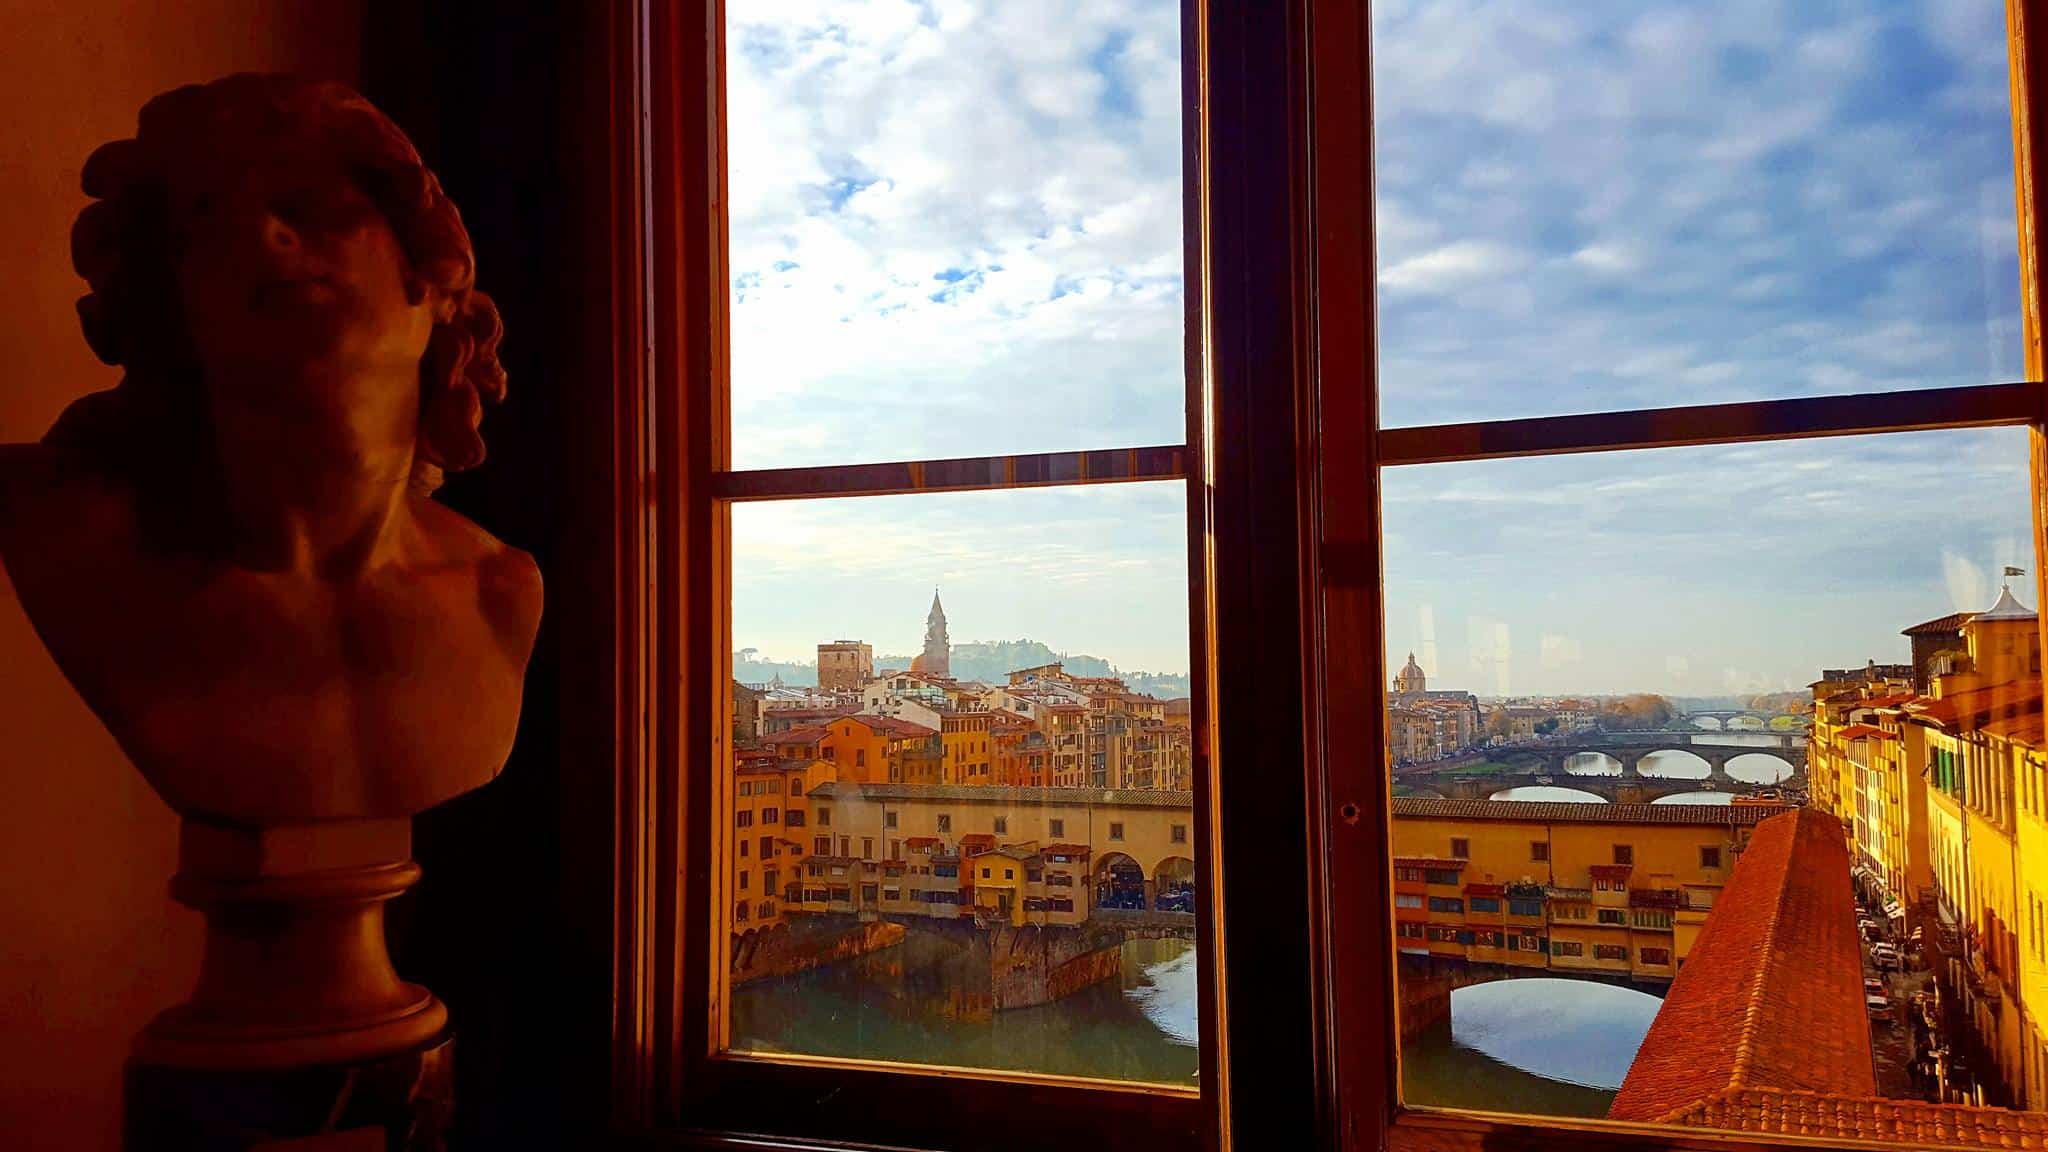 View of the Arno river and Ponte Vecchio bridge from Uffizi Gallery Florence Italy